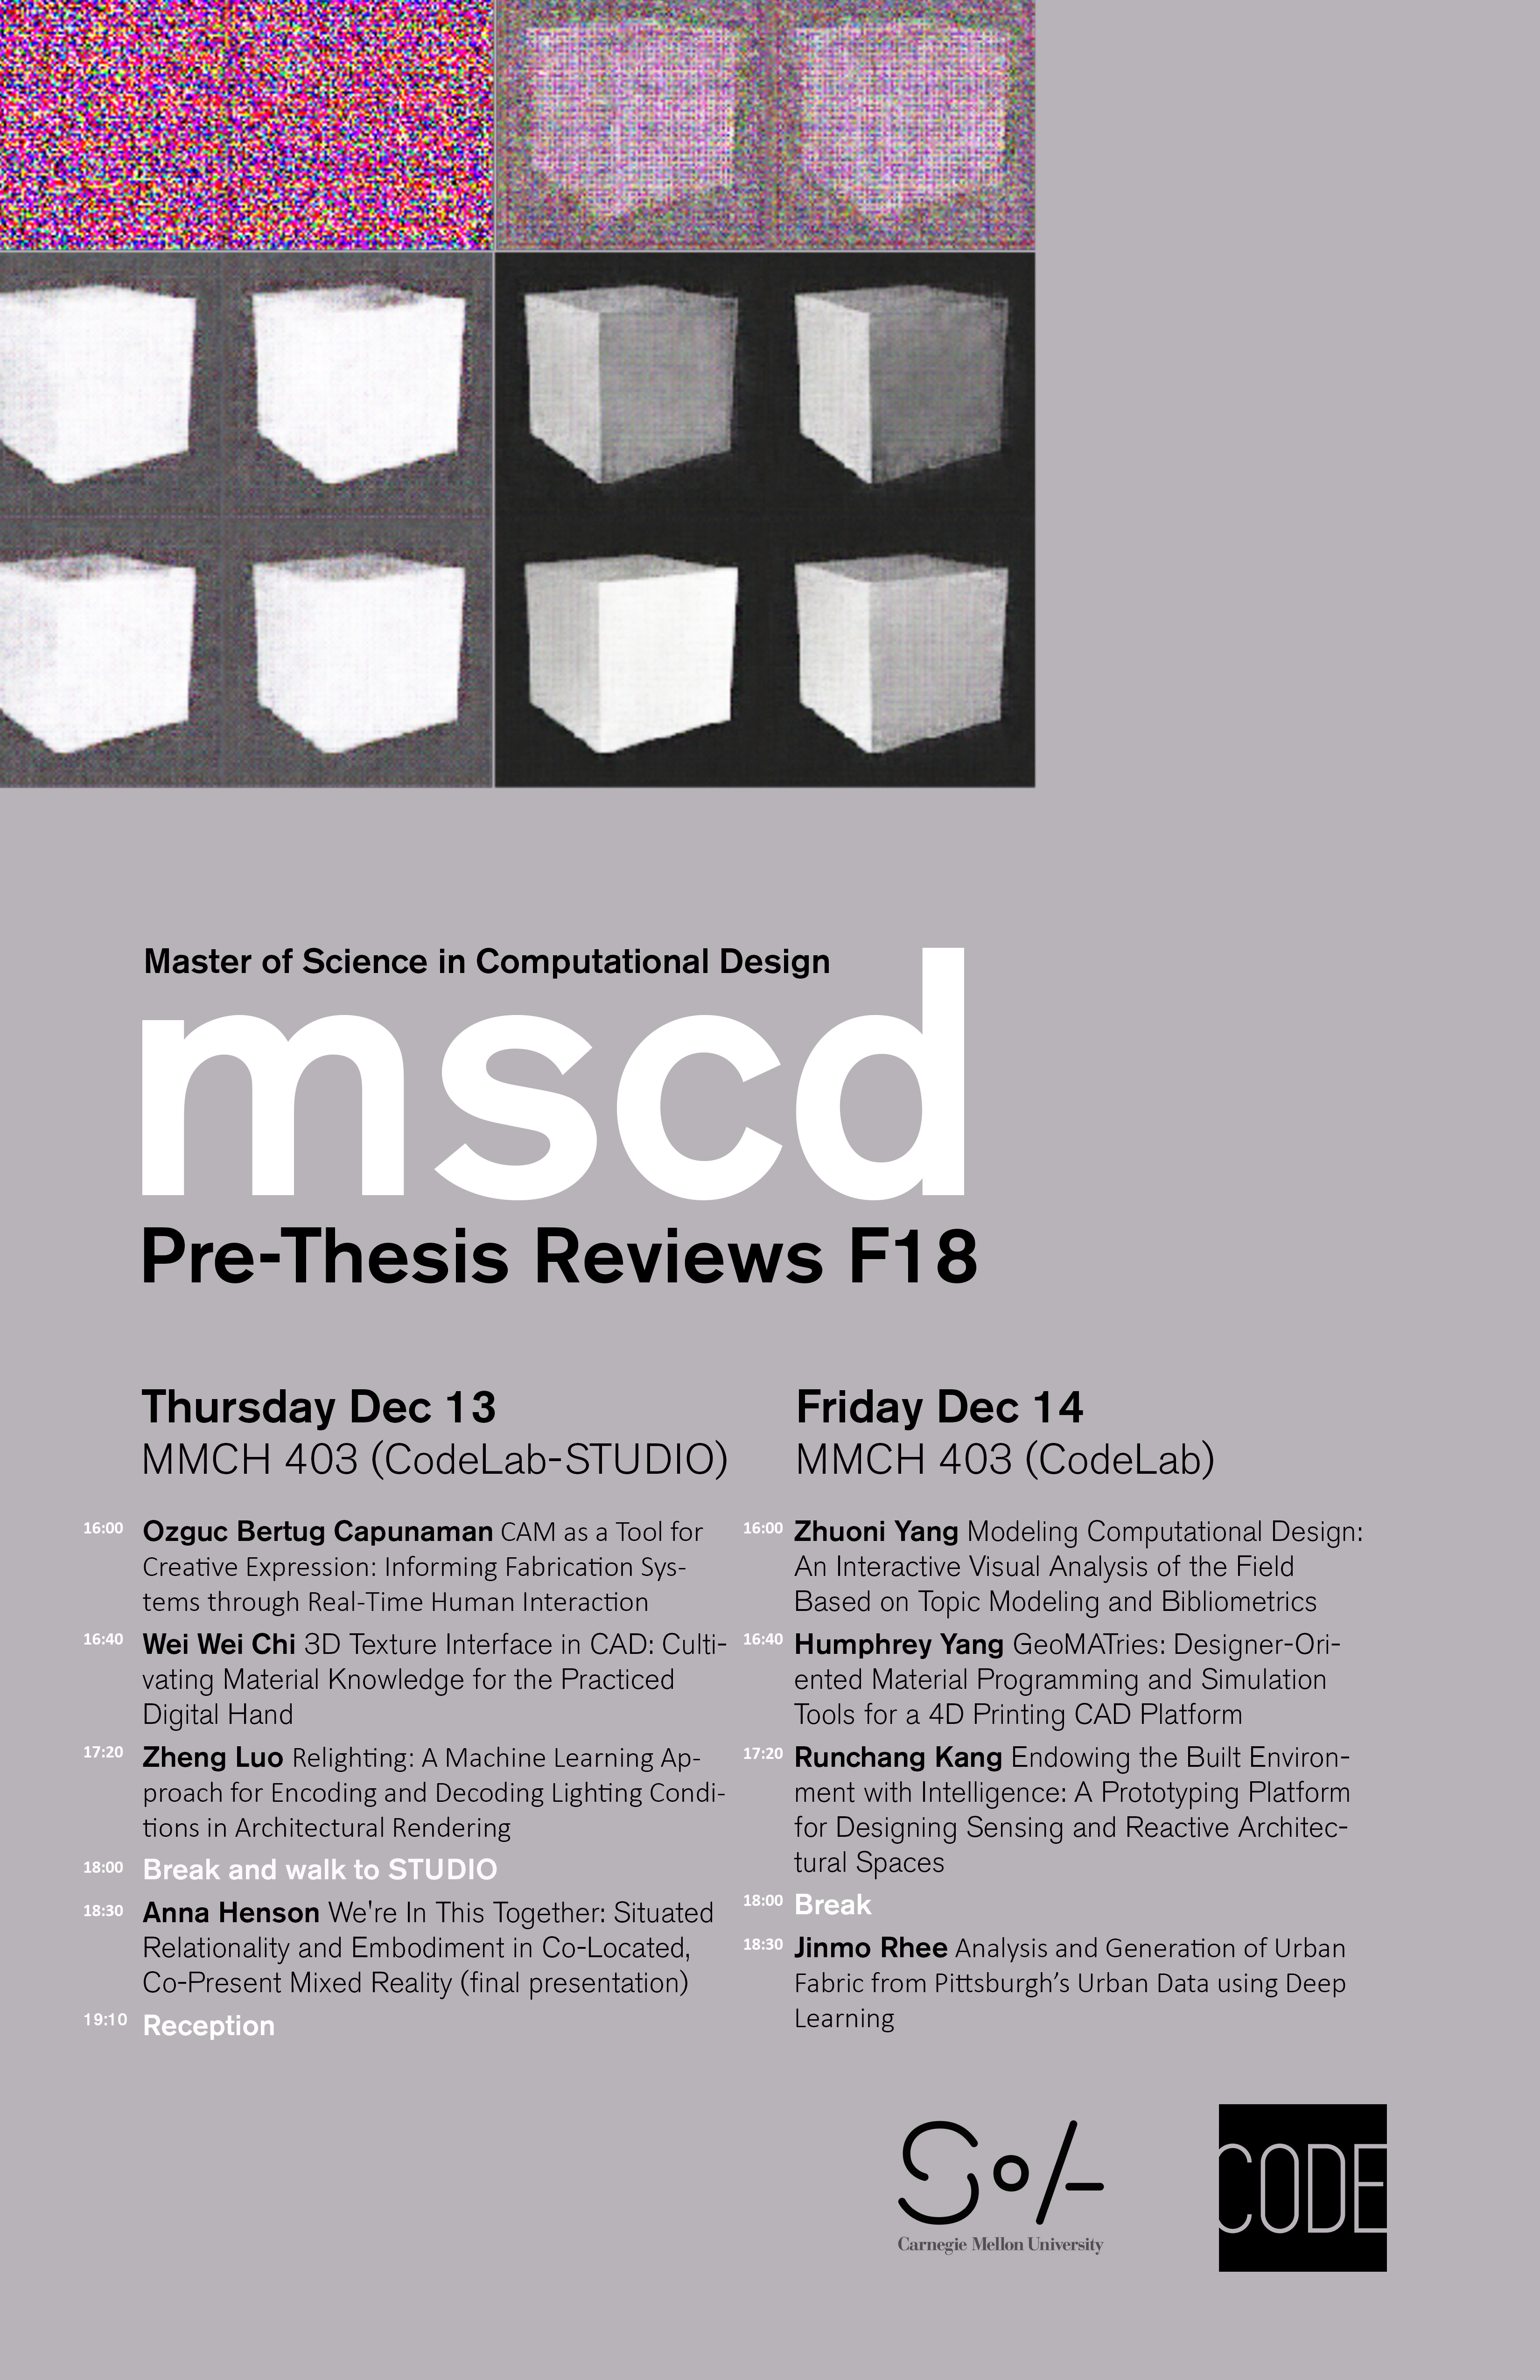 mscd pre-thesis reviews fall 2018 poster